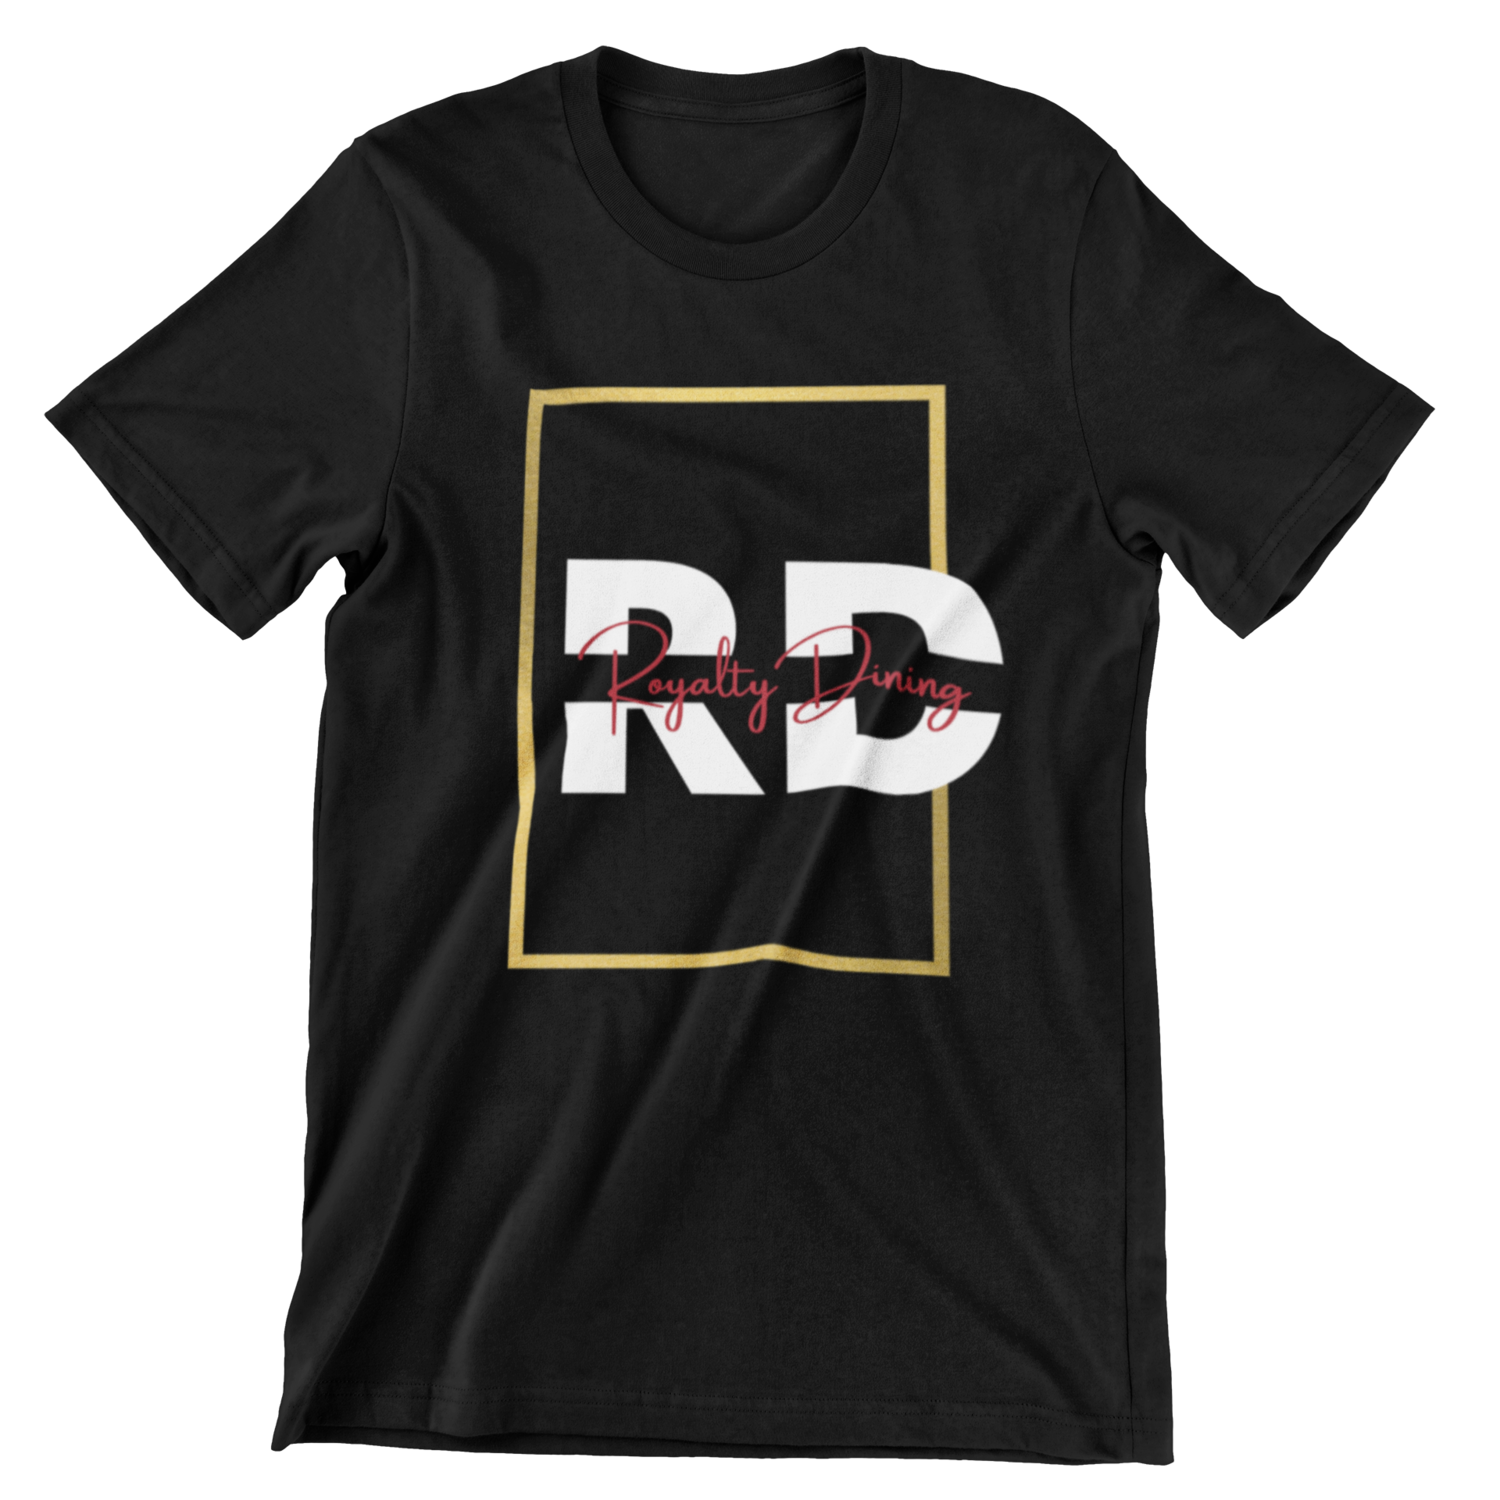 The Royalty Dining Tee